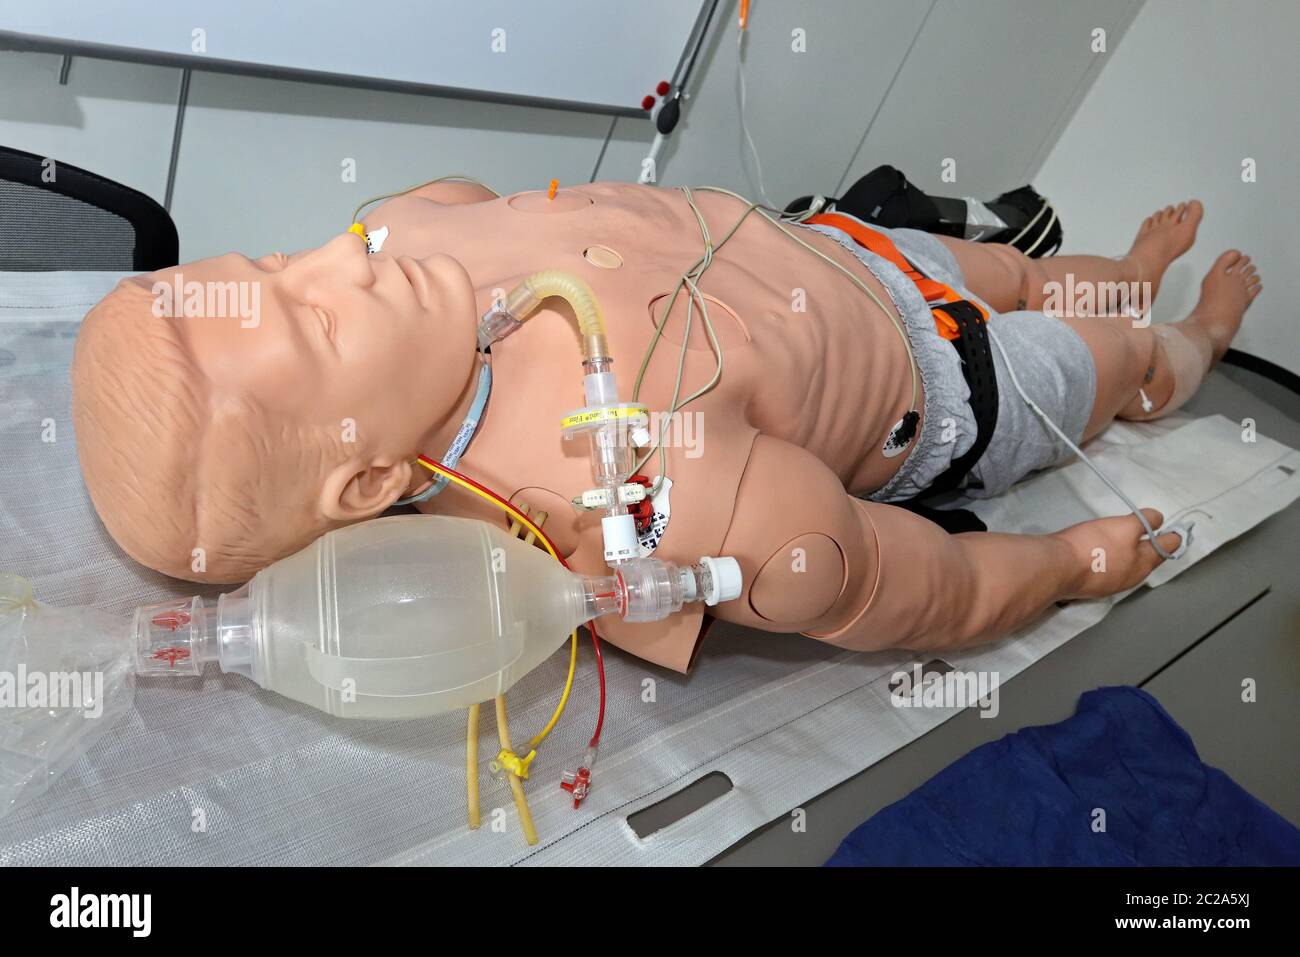 Dummy for first aid training Stock Photo